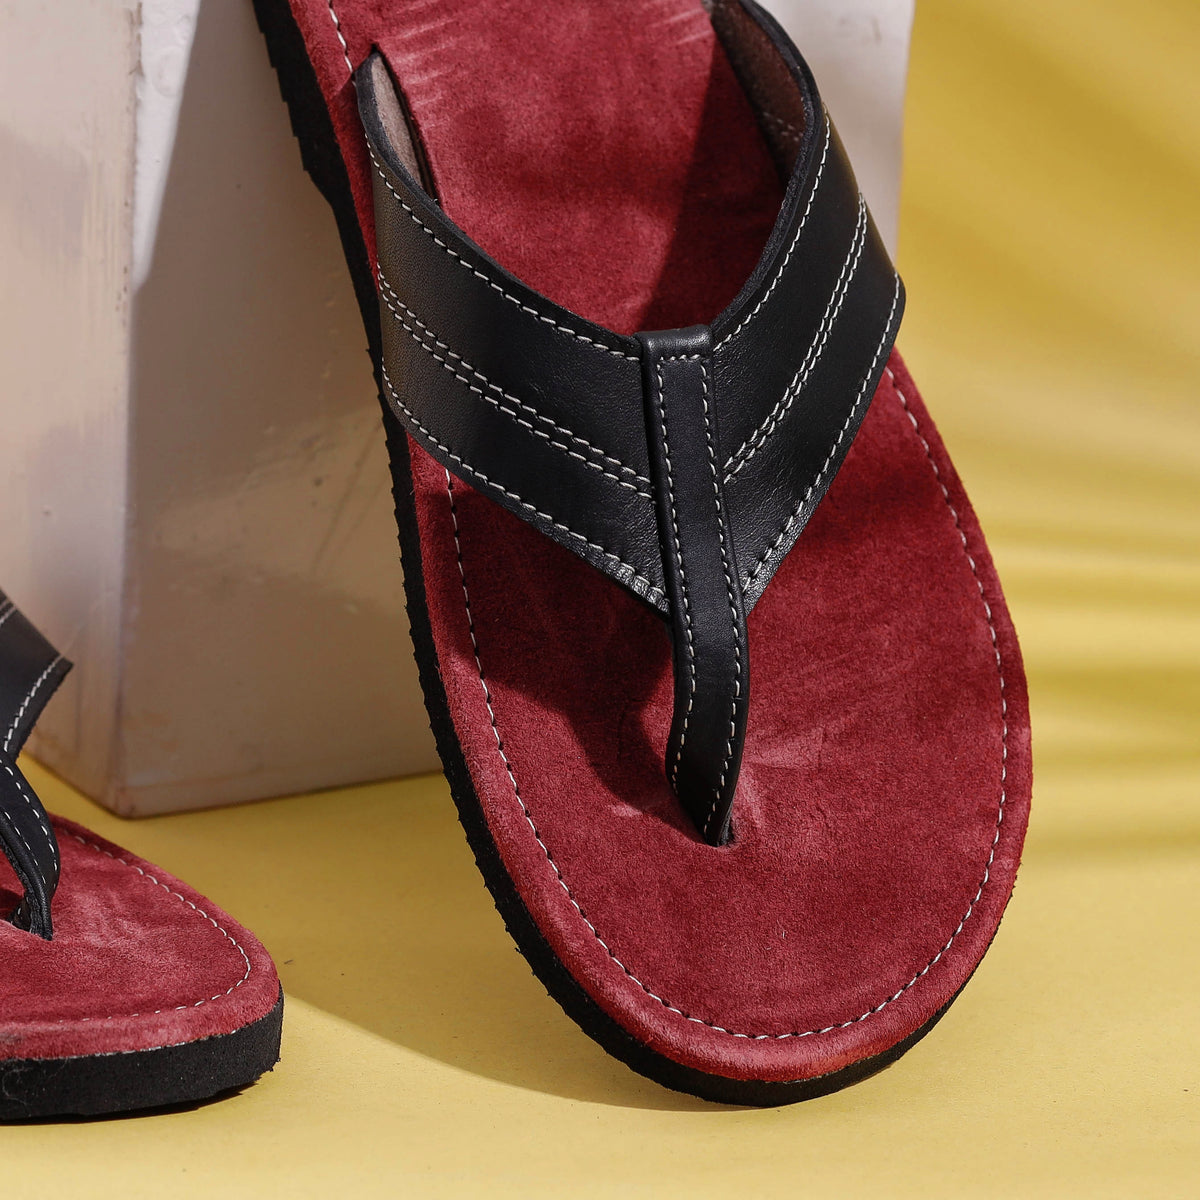 Black &amp; Maroon Handcrafted Men&#39;s Leather Slippers with Suede